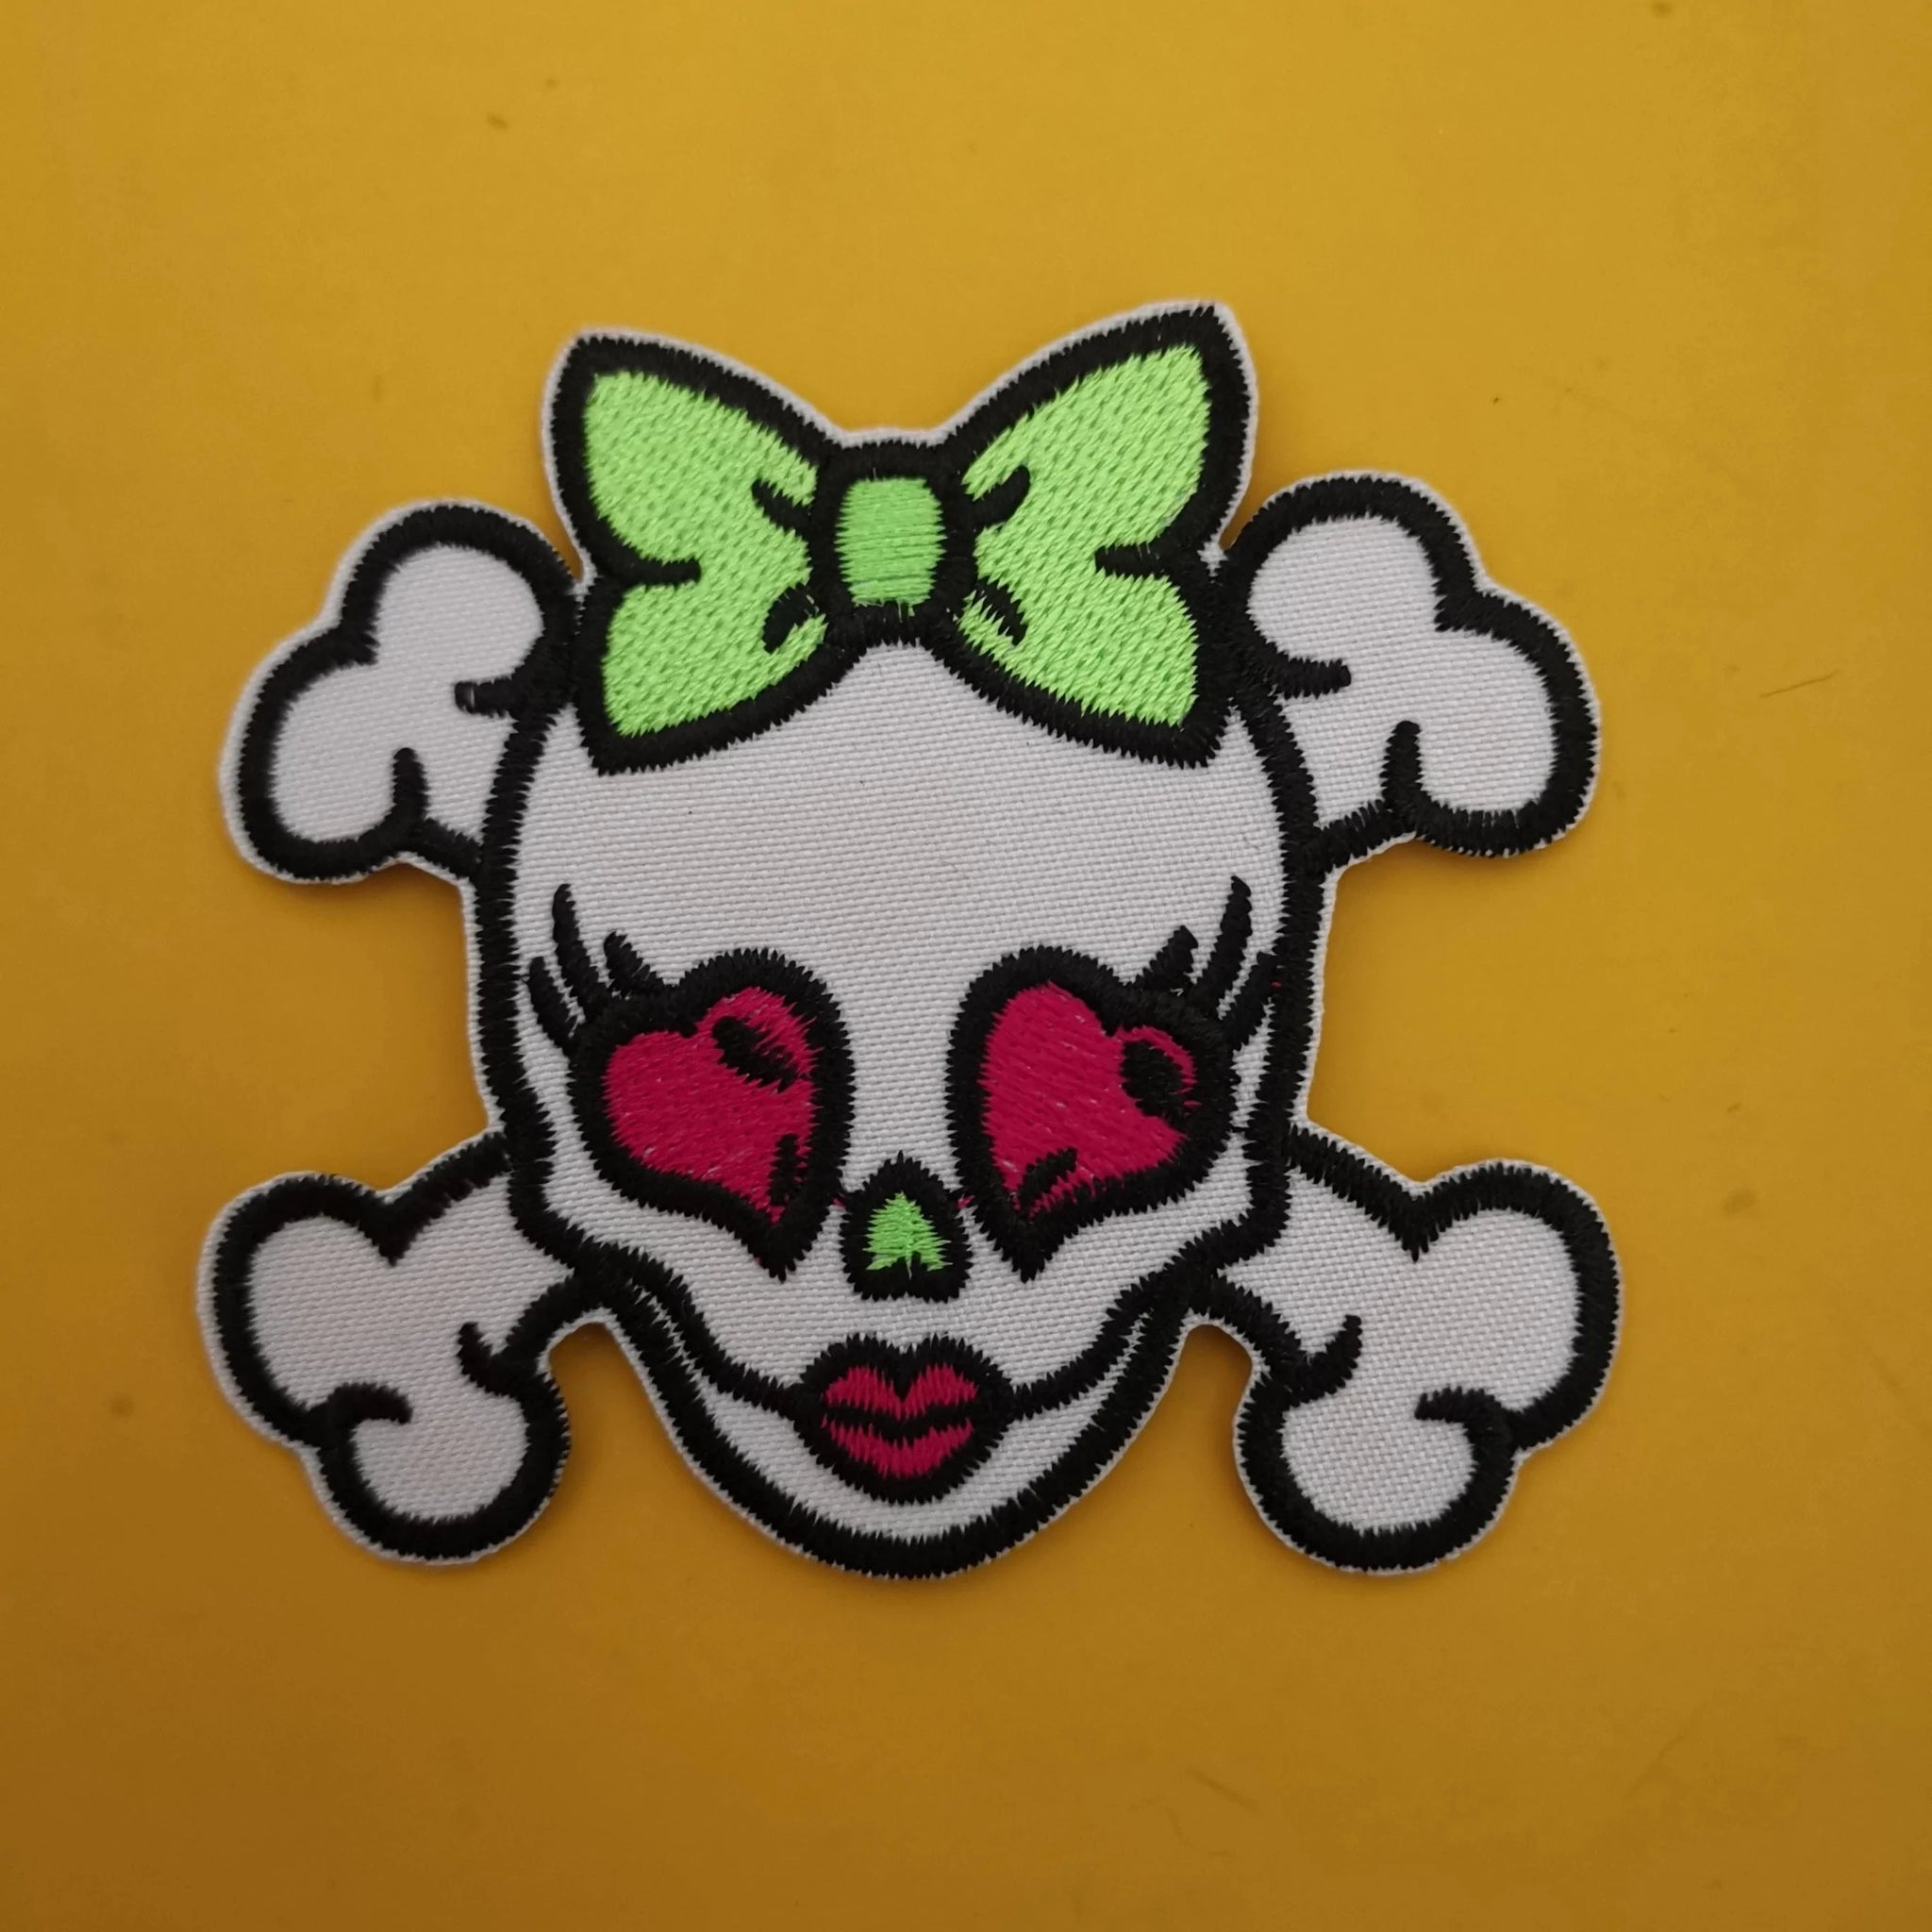 Cute Skull Iron on Patch